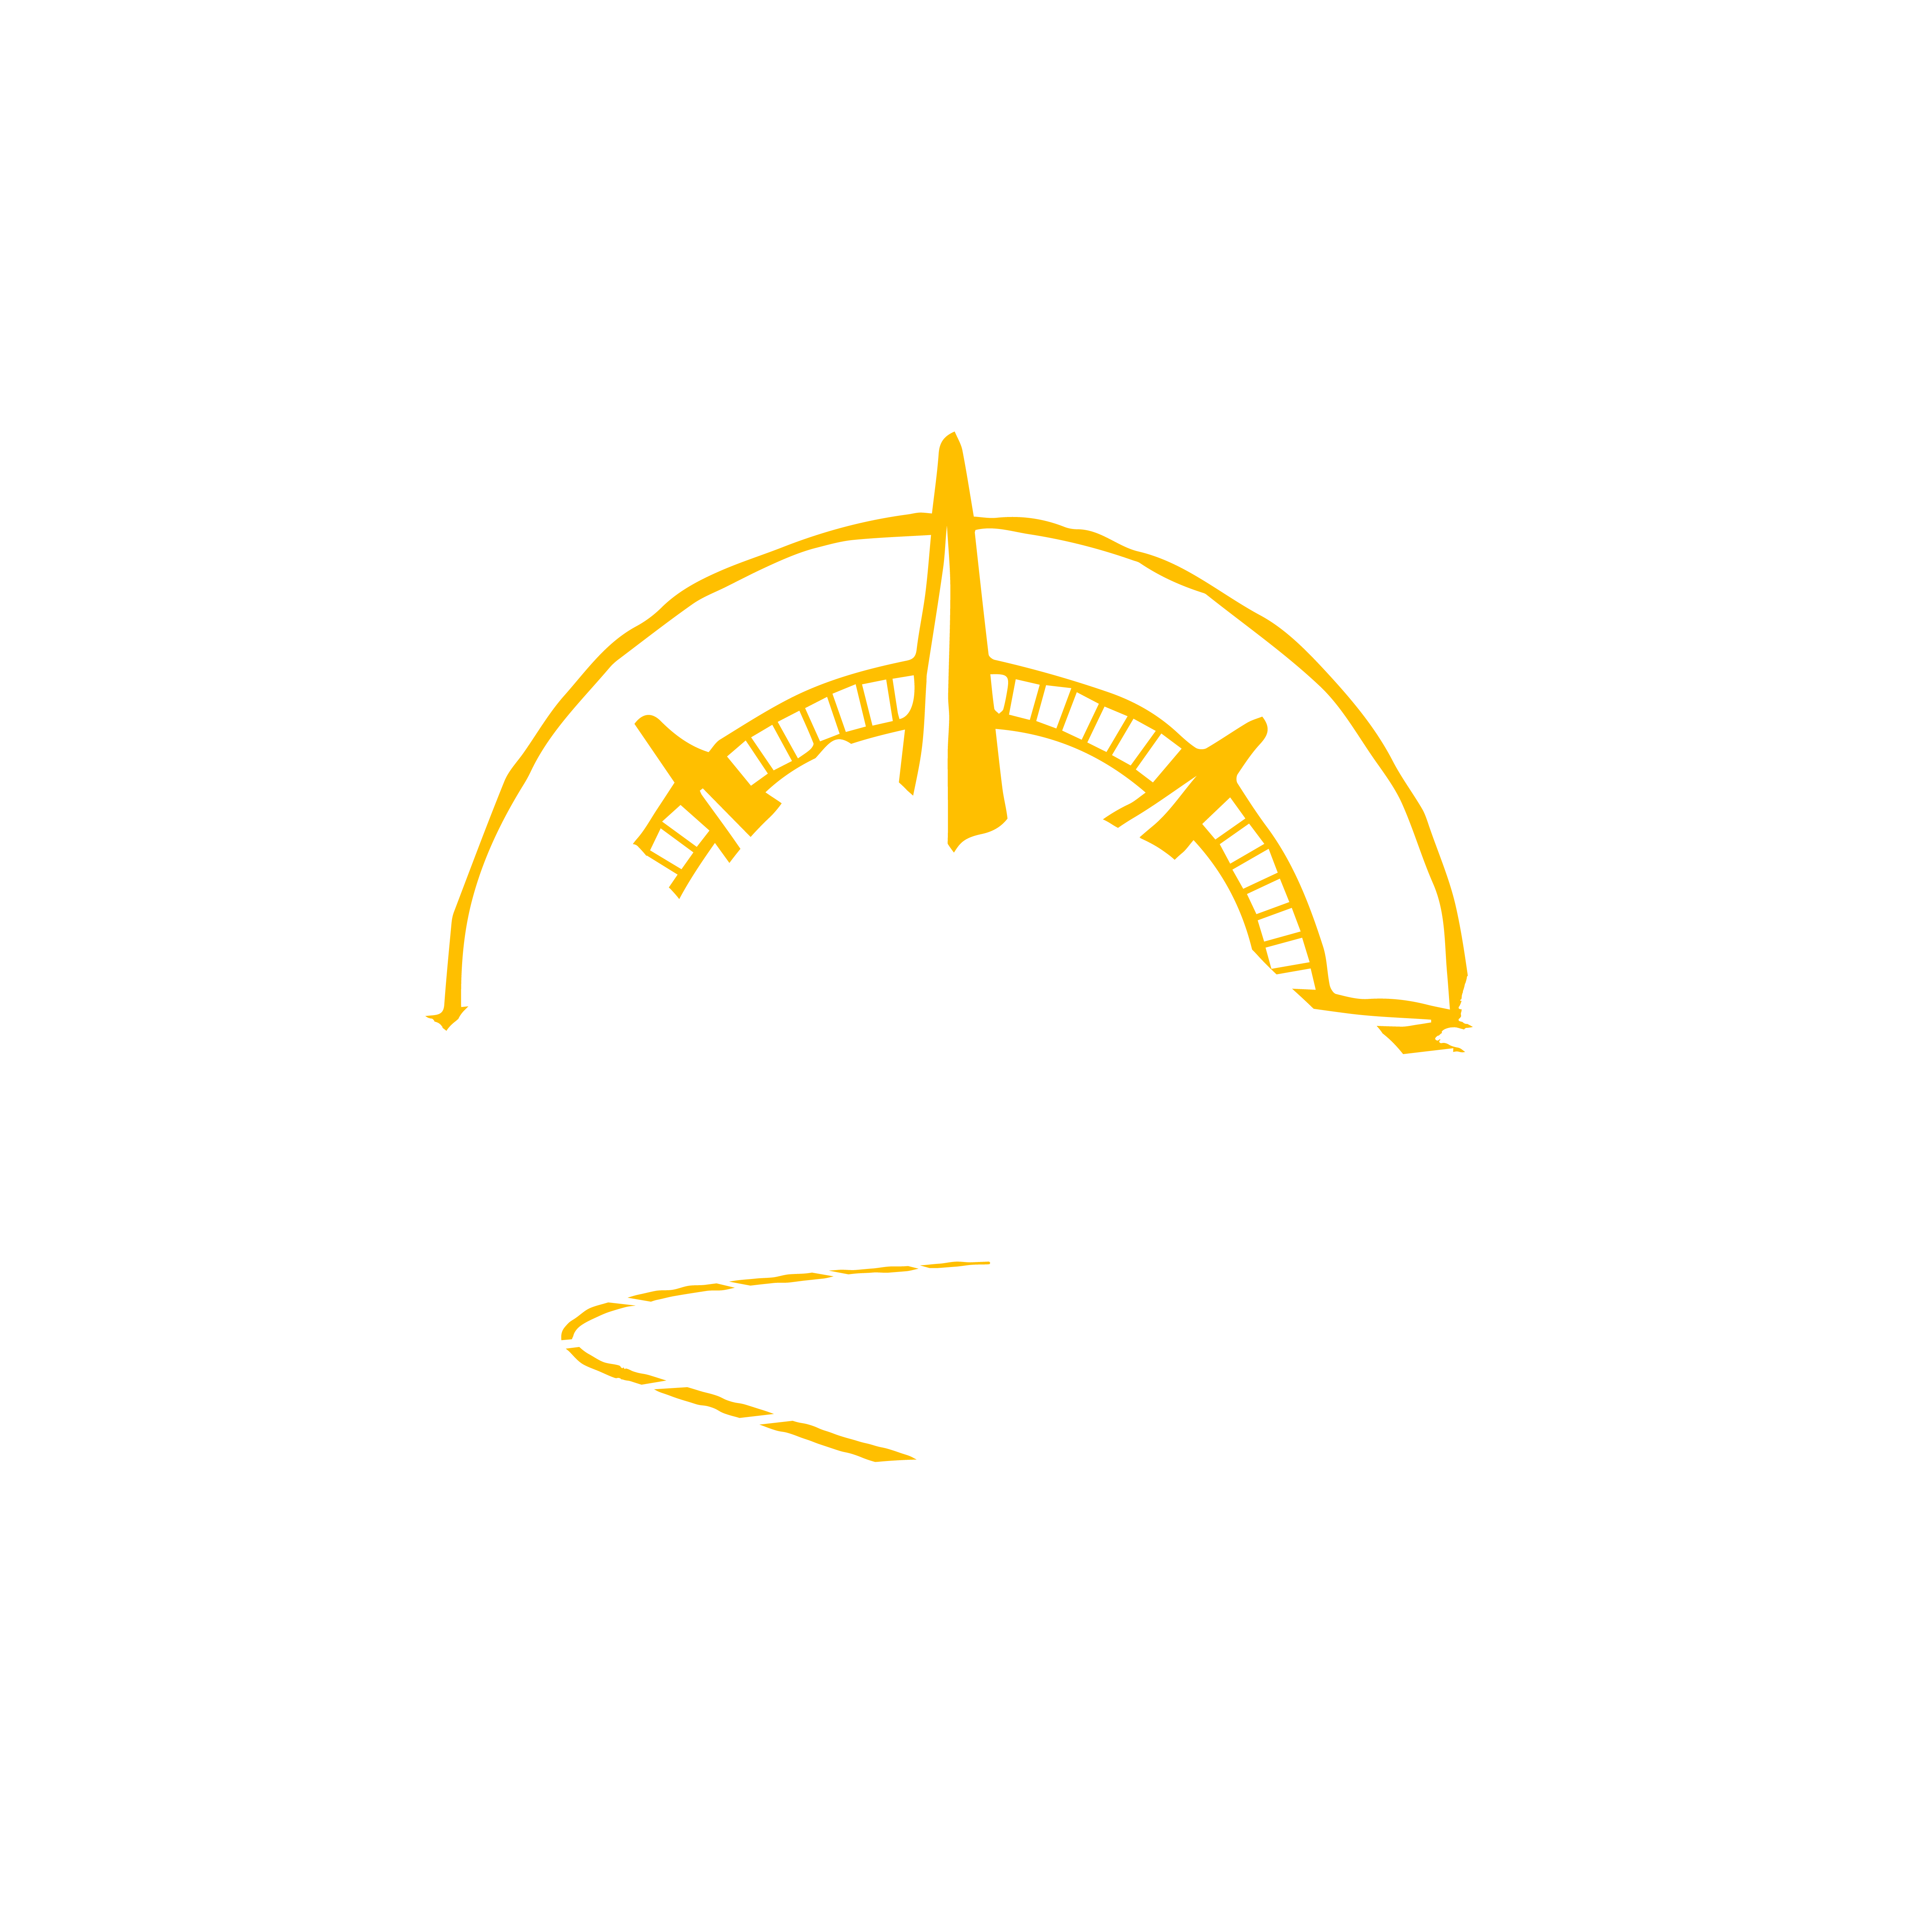 White Logo with road, mountains, and compass representing sun.